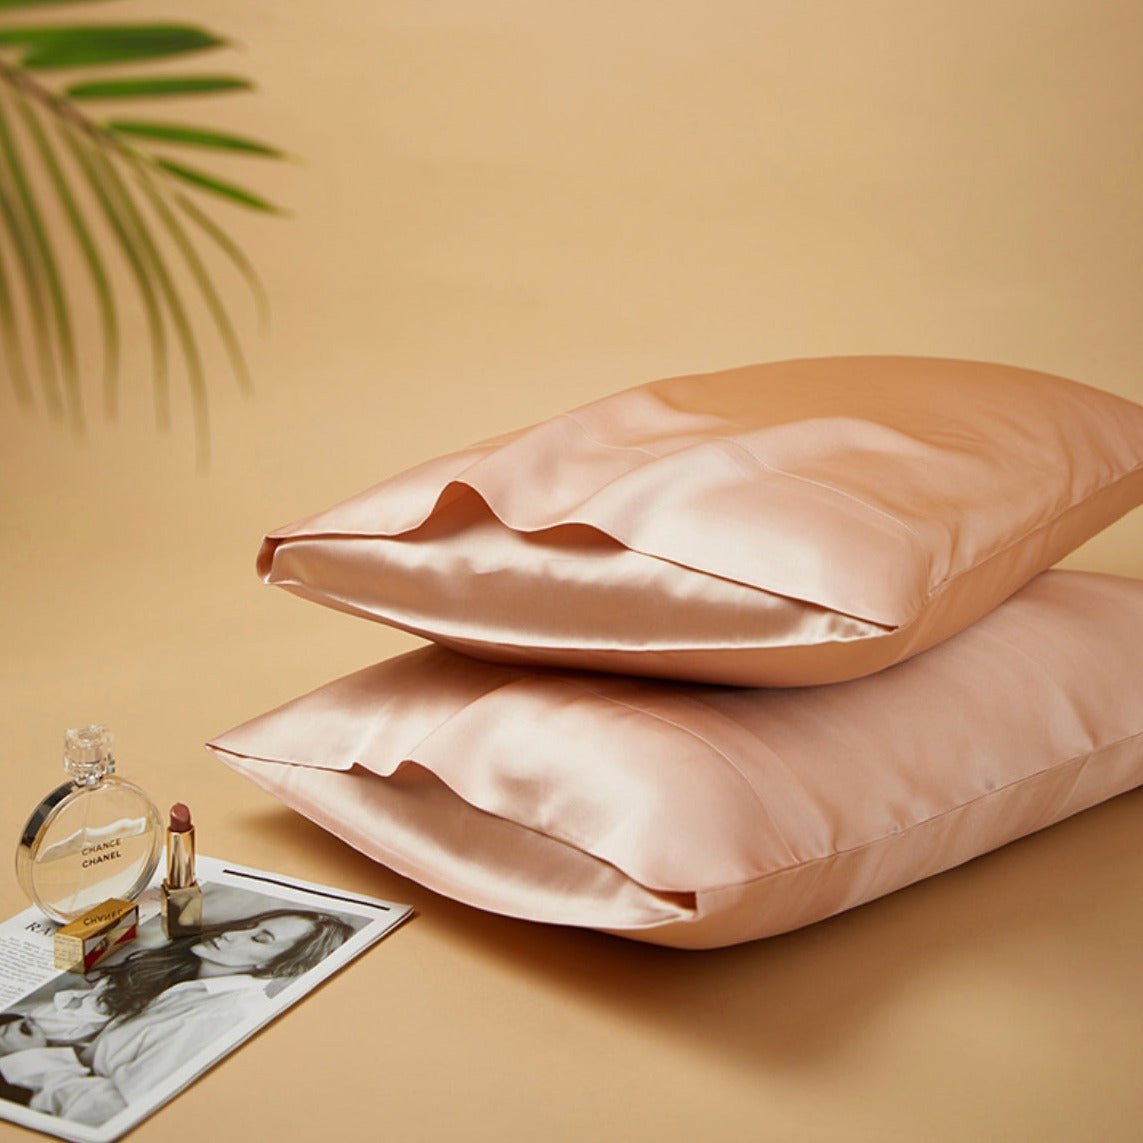 Silky Gift Box: 6A Grade Organic Mulberry Silk Pillowcase Set of 2 Pcs - 30 Momme, Pure Silk on Both Sides - 6A Grade Organic Mulberry Silk Pillowcase-Rose Gold - INSPECIAL HOME